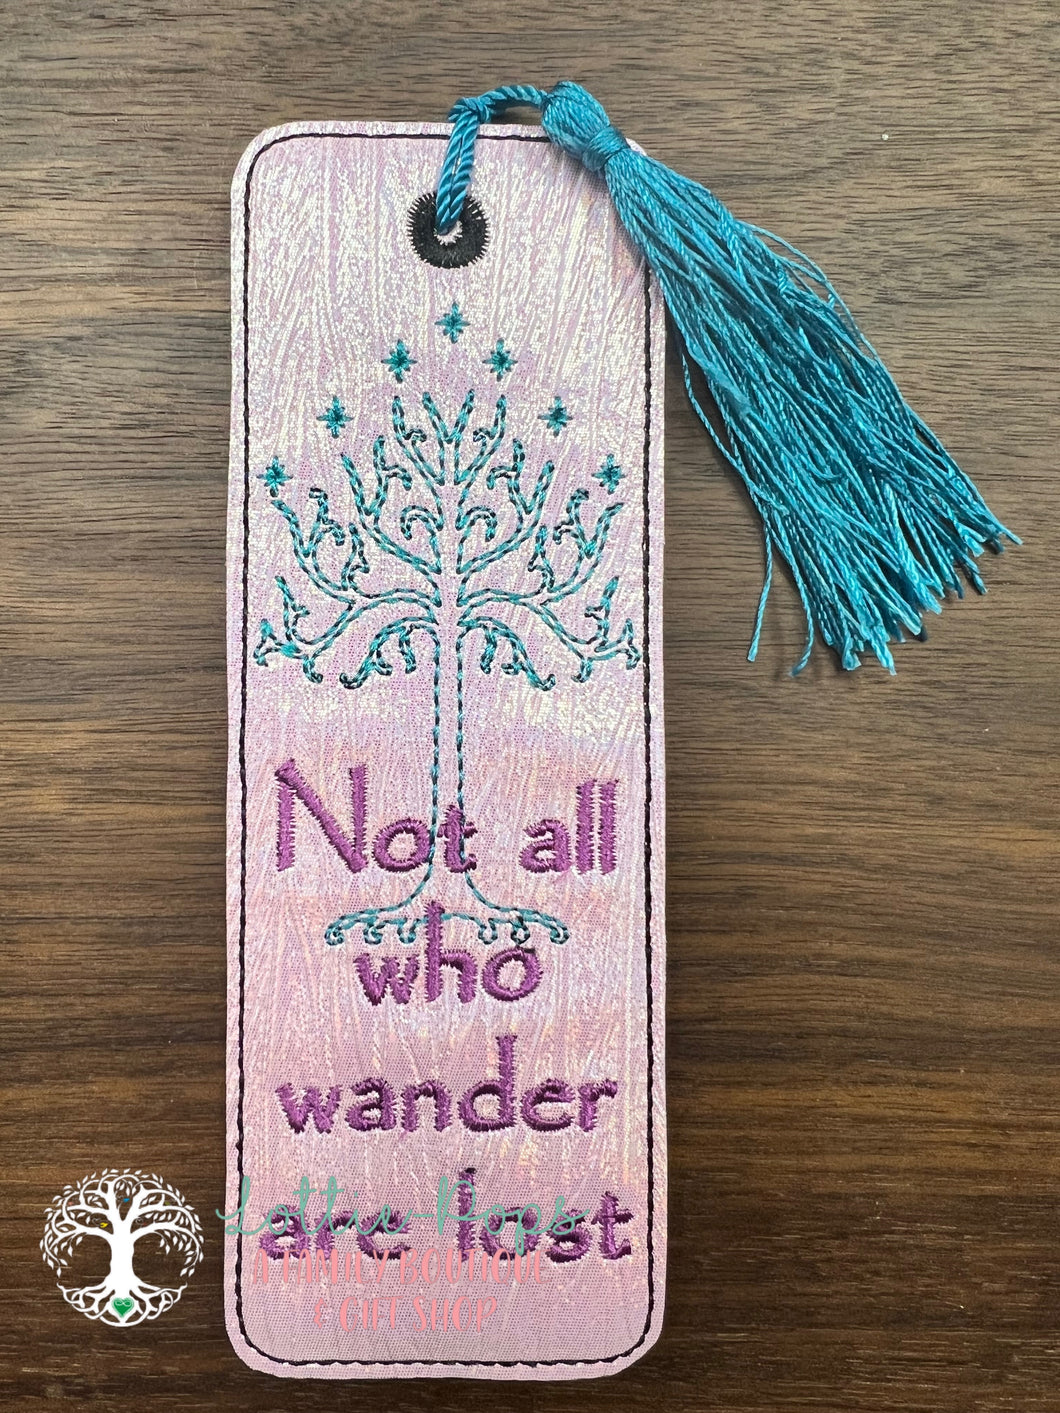 Not all who wander bookmark - Cobblestone Crafts